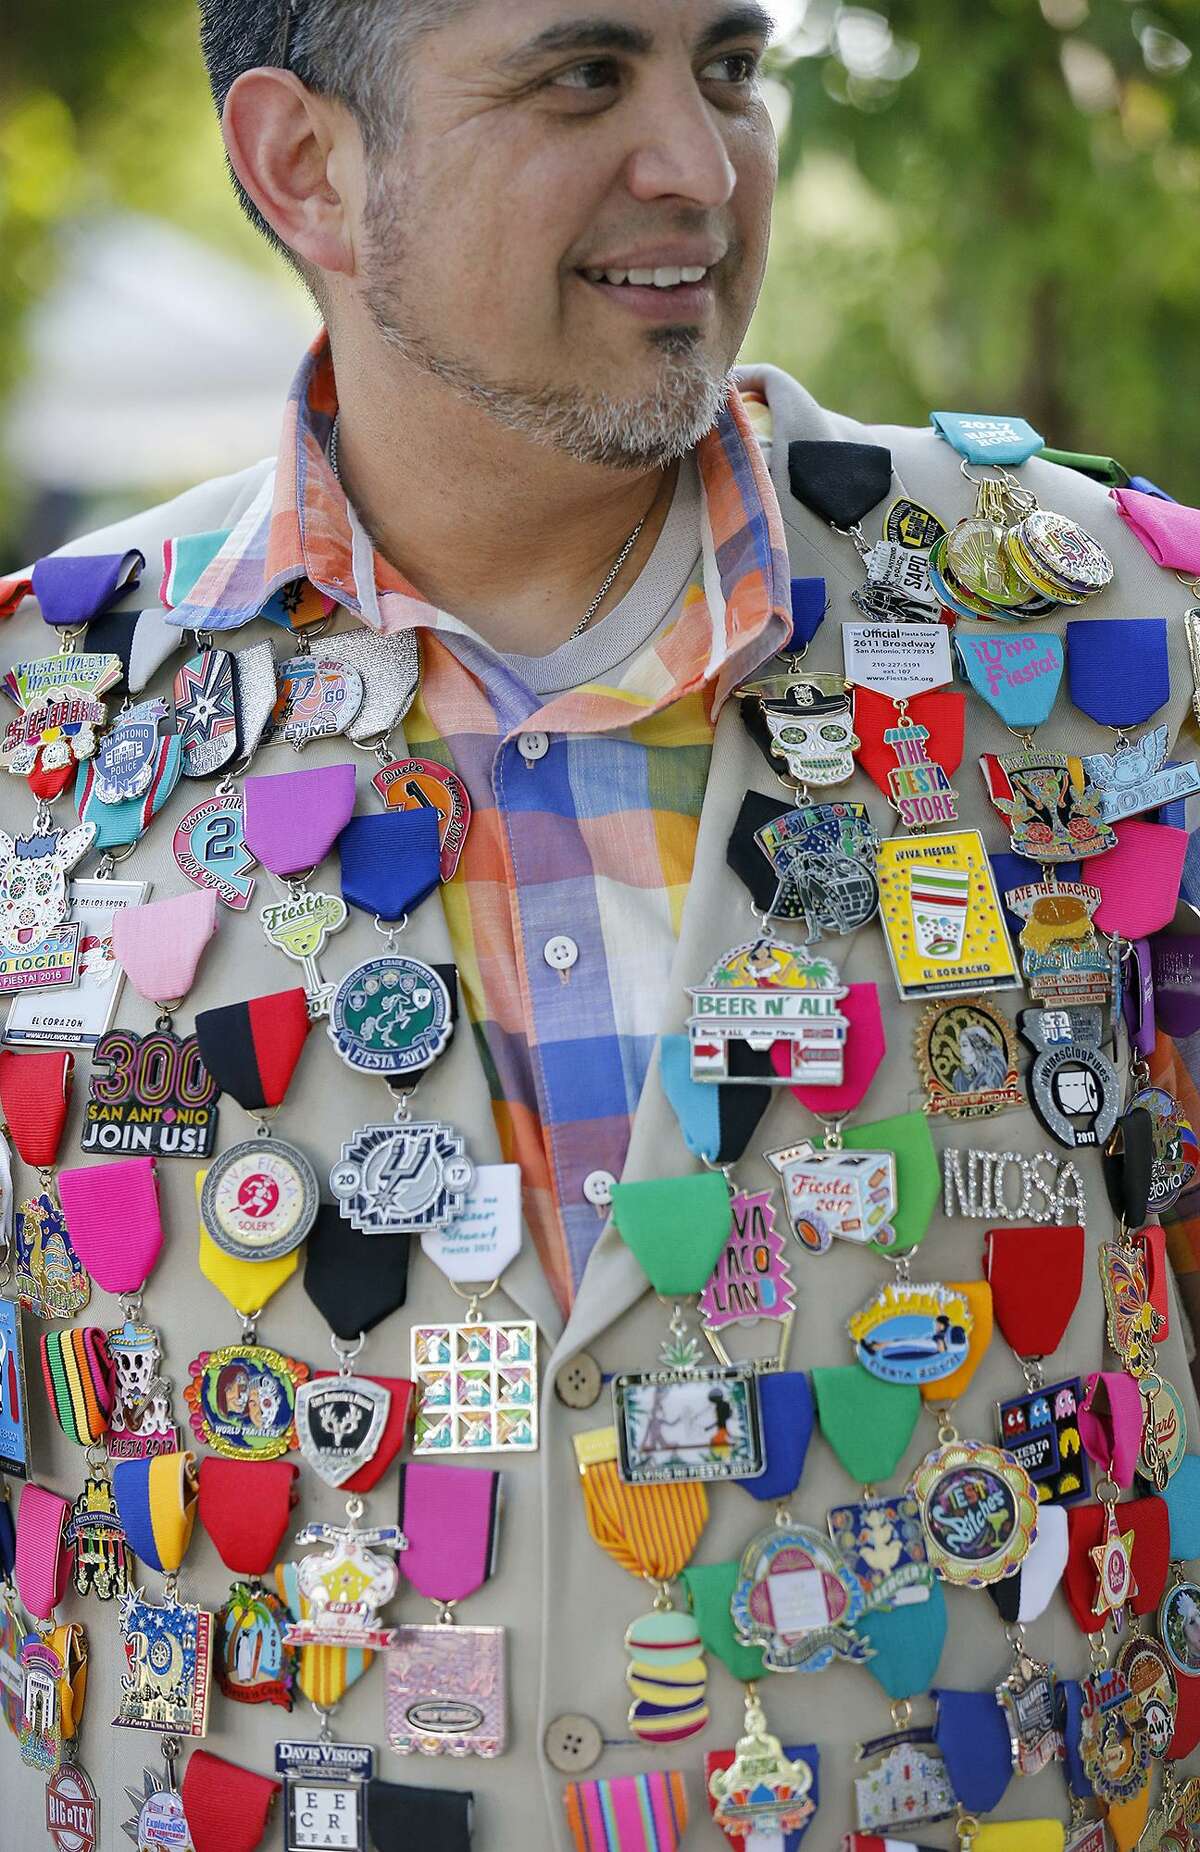 Buddy Sanchez wears medals on his vest during the Fiesta Fiesta event in 2017 at Hemisfair Park.